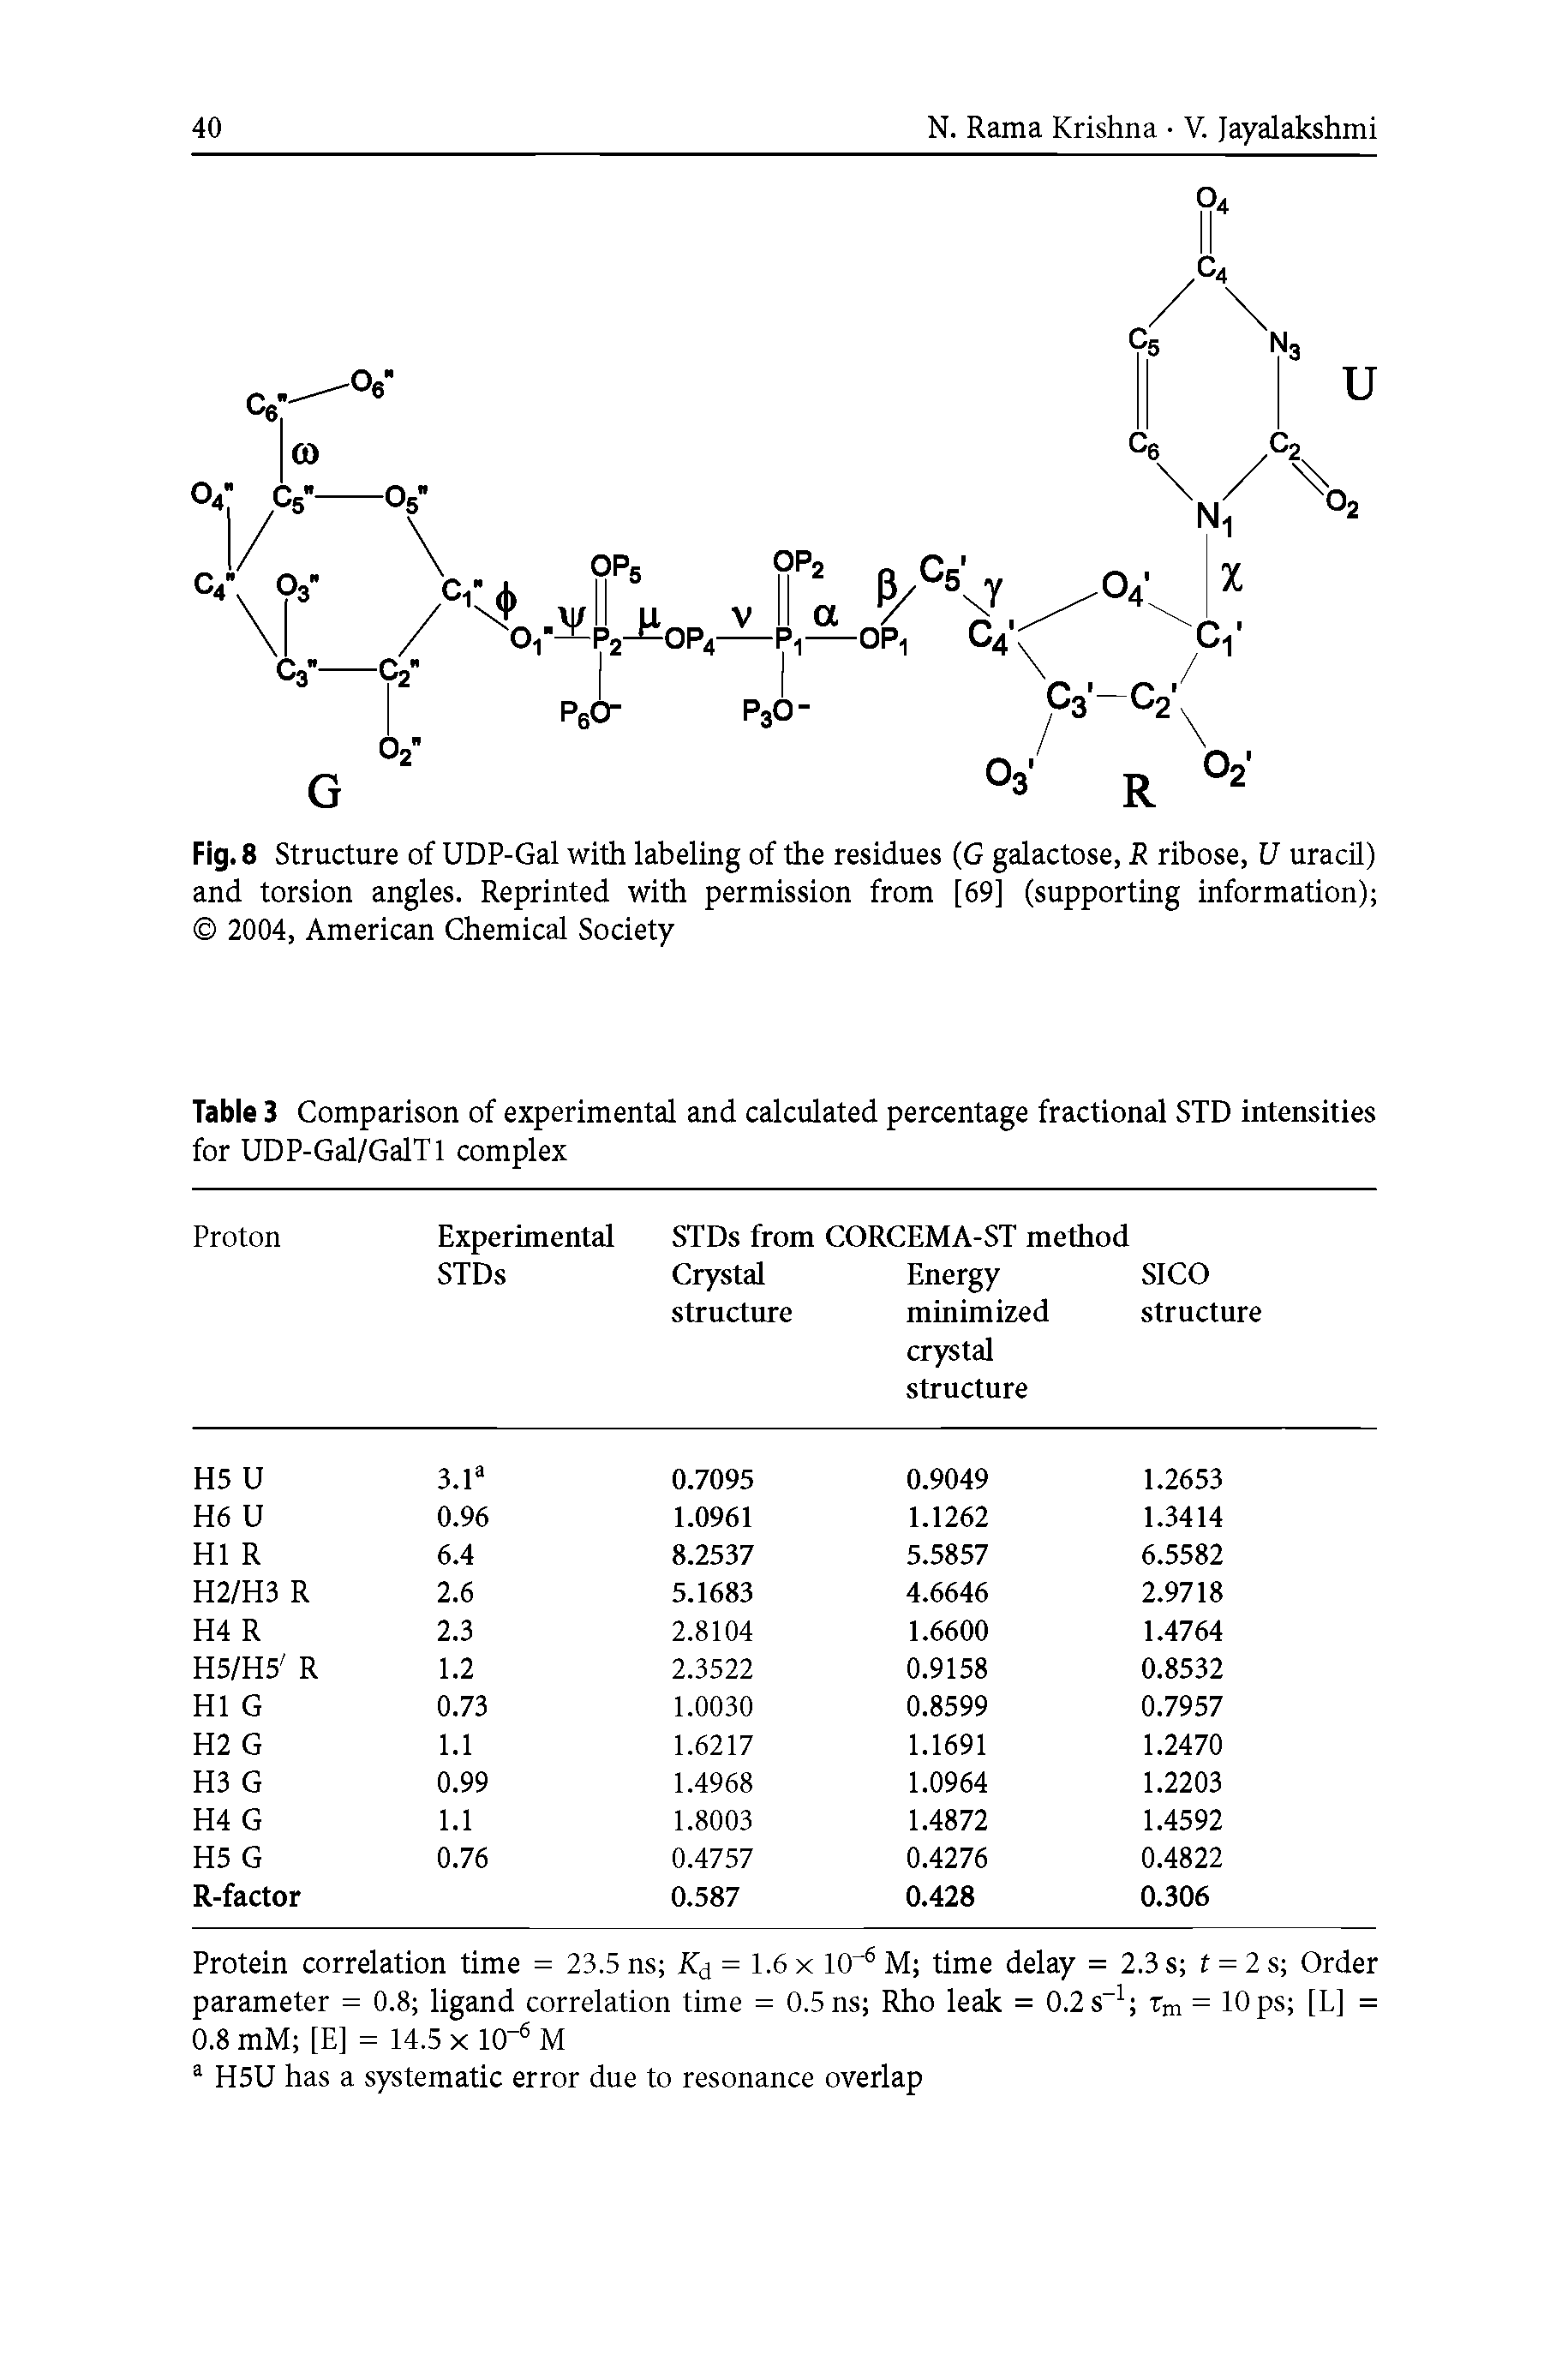 Fig.8 Structure of UDP-Gal with labeling of the residues (G galactose, R ribose, U uracil) and torsion angles. Reprinted with permission from [69] (supporting information) 2004, American Chemical Society...